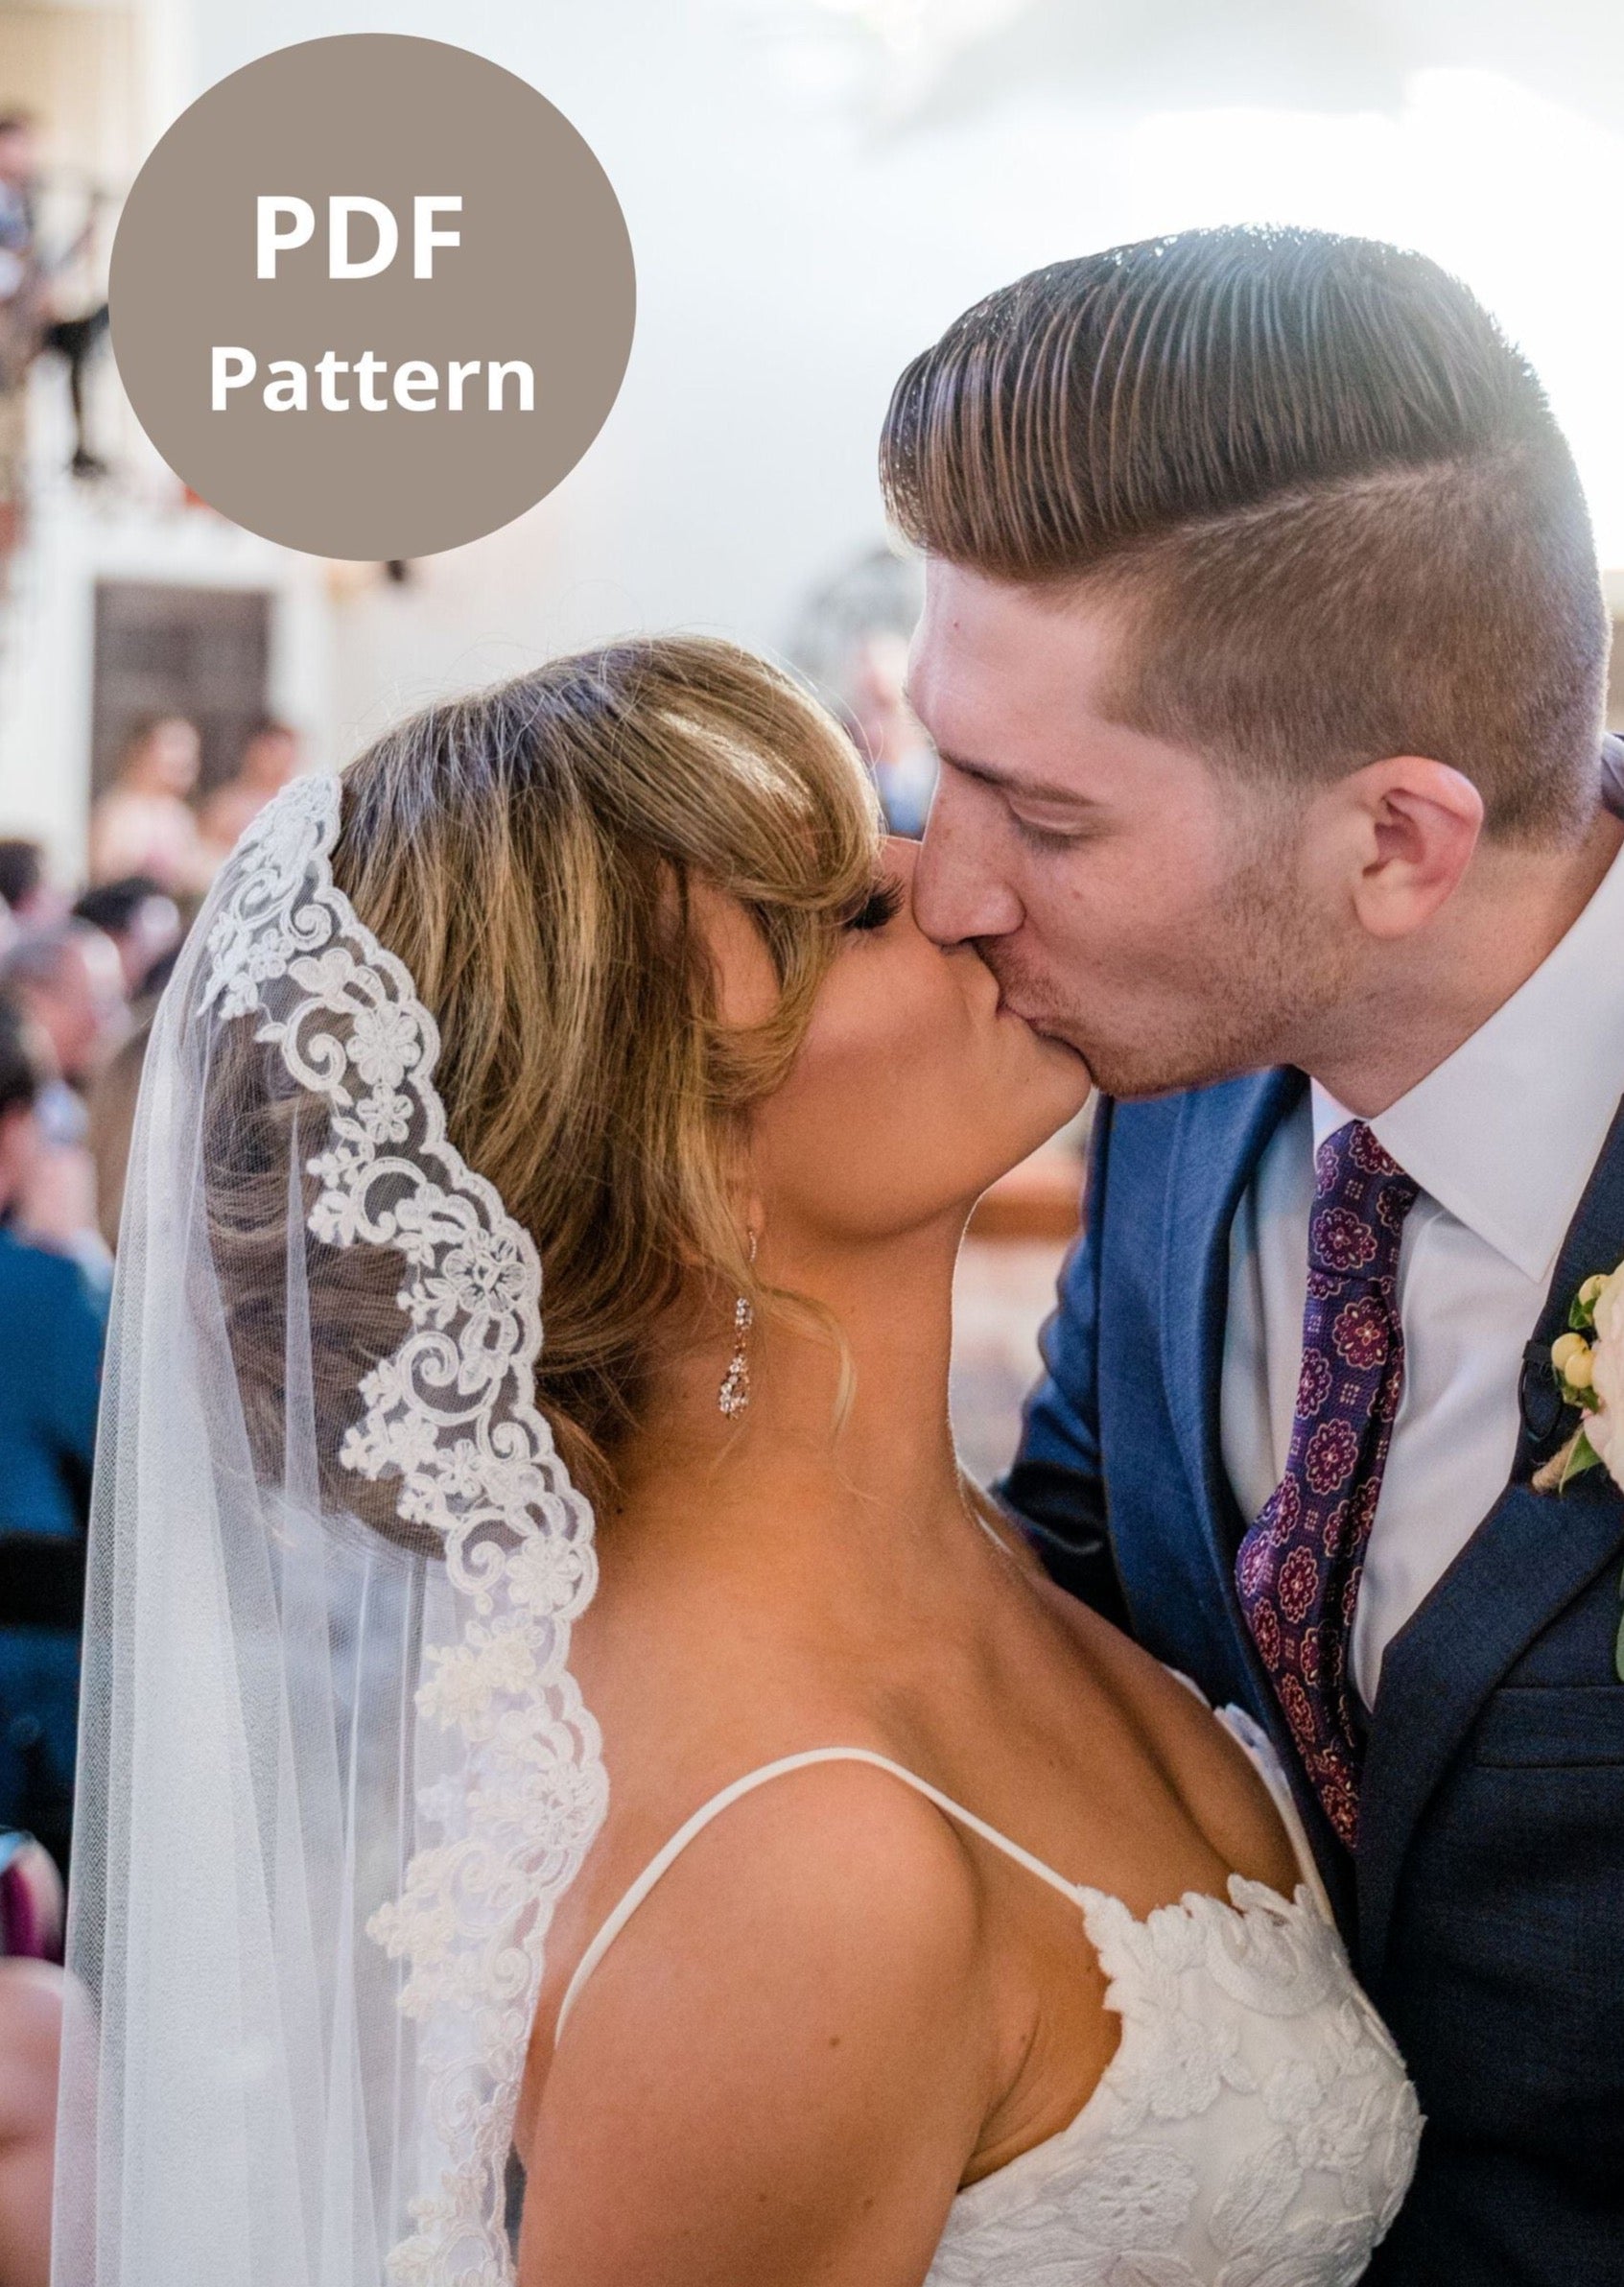 sheer one layer mantilla wedding veil on bride wearing updo with instructions on how to make the accessory